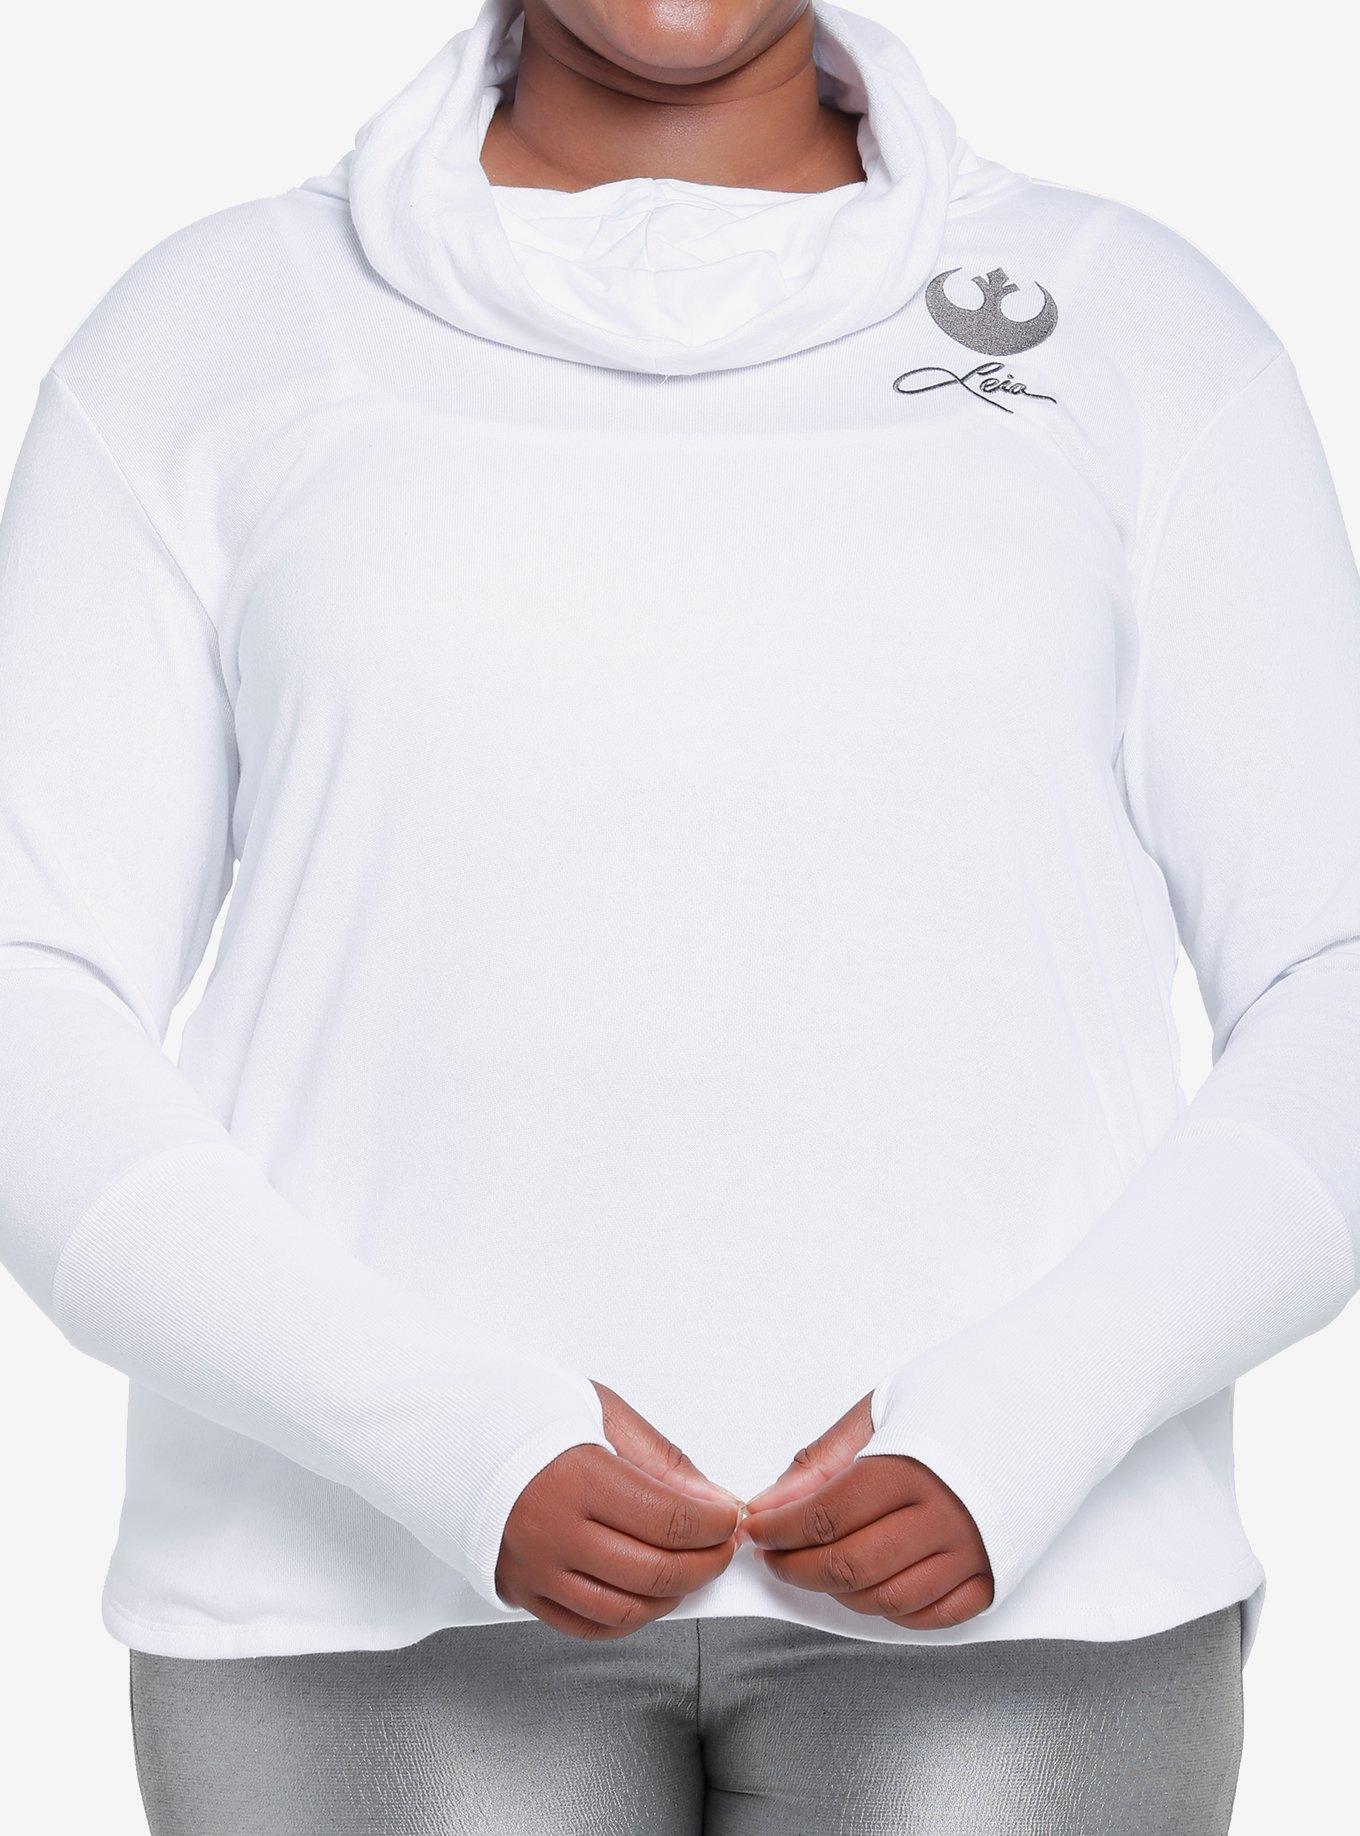 Her Universe Star Wars Princess Leia Cowl Long-Sleeve Top Plus Size Her Universe Exclusive, OFF WHITE, hi-res